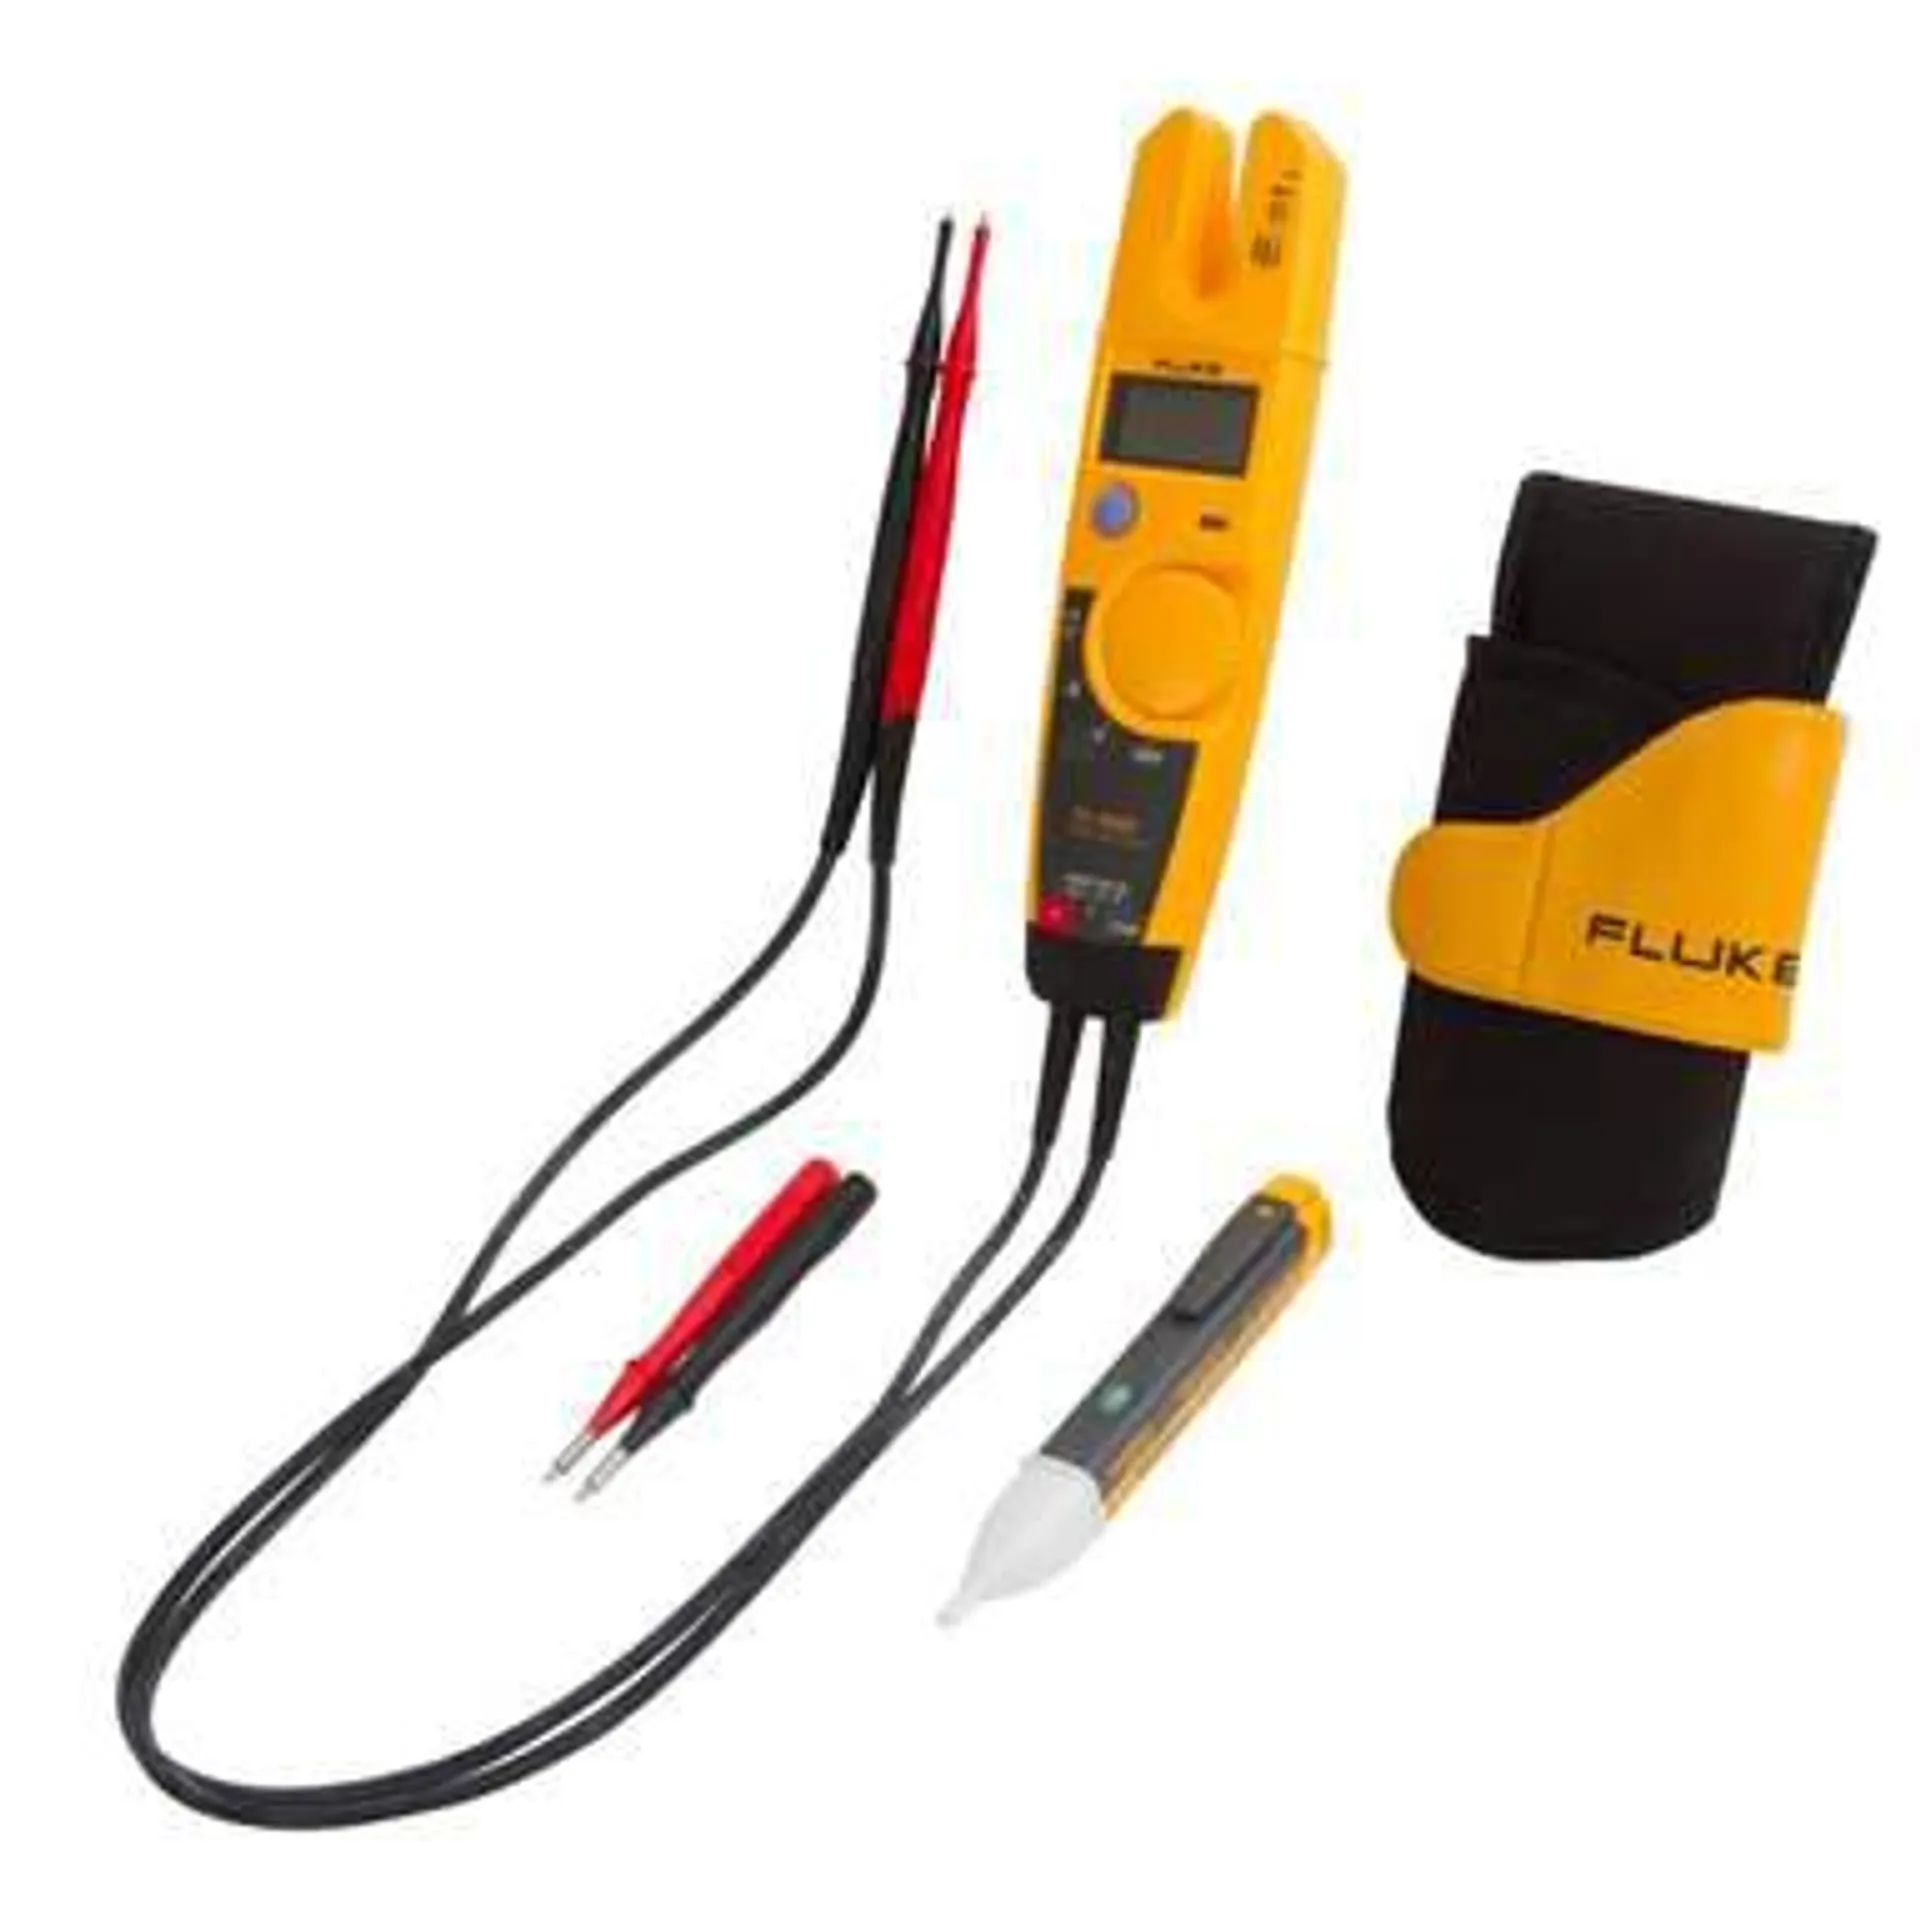 Fluke T5-1000 Kit with Holster and Voltage Detector